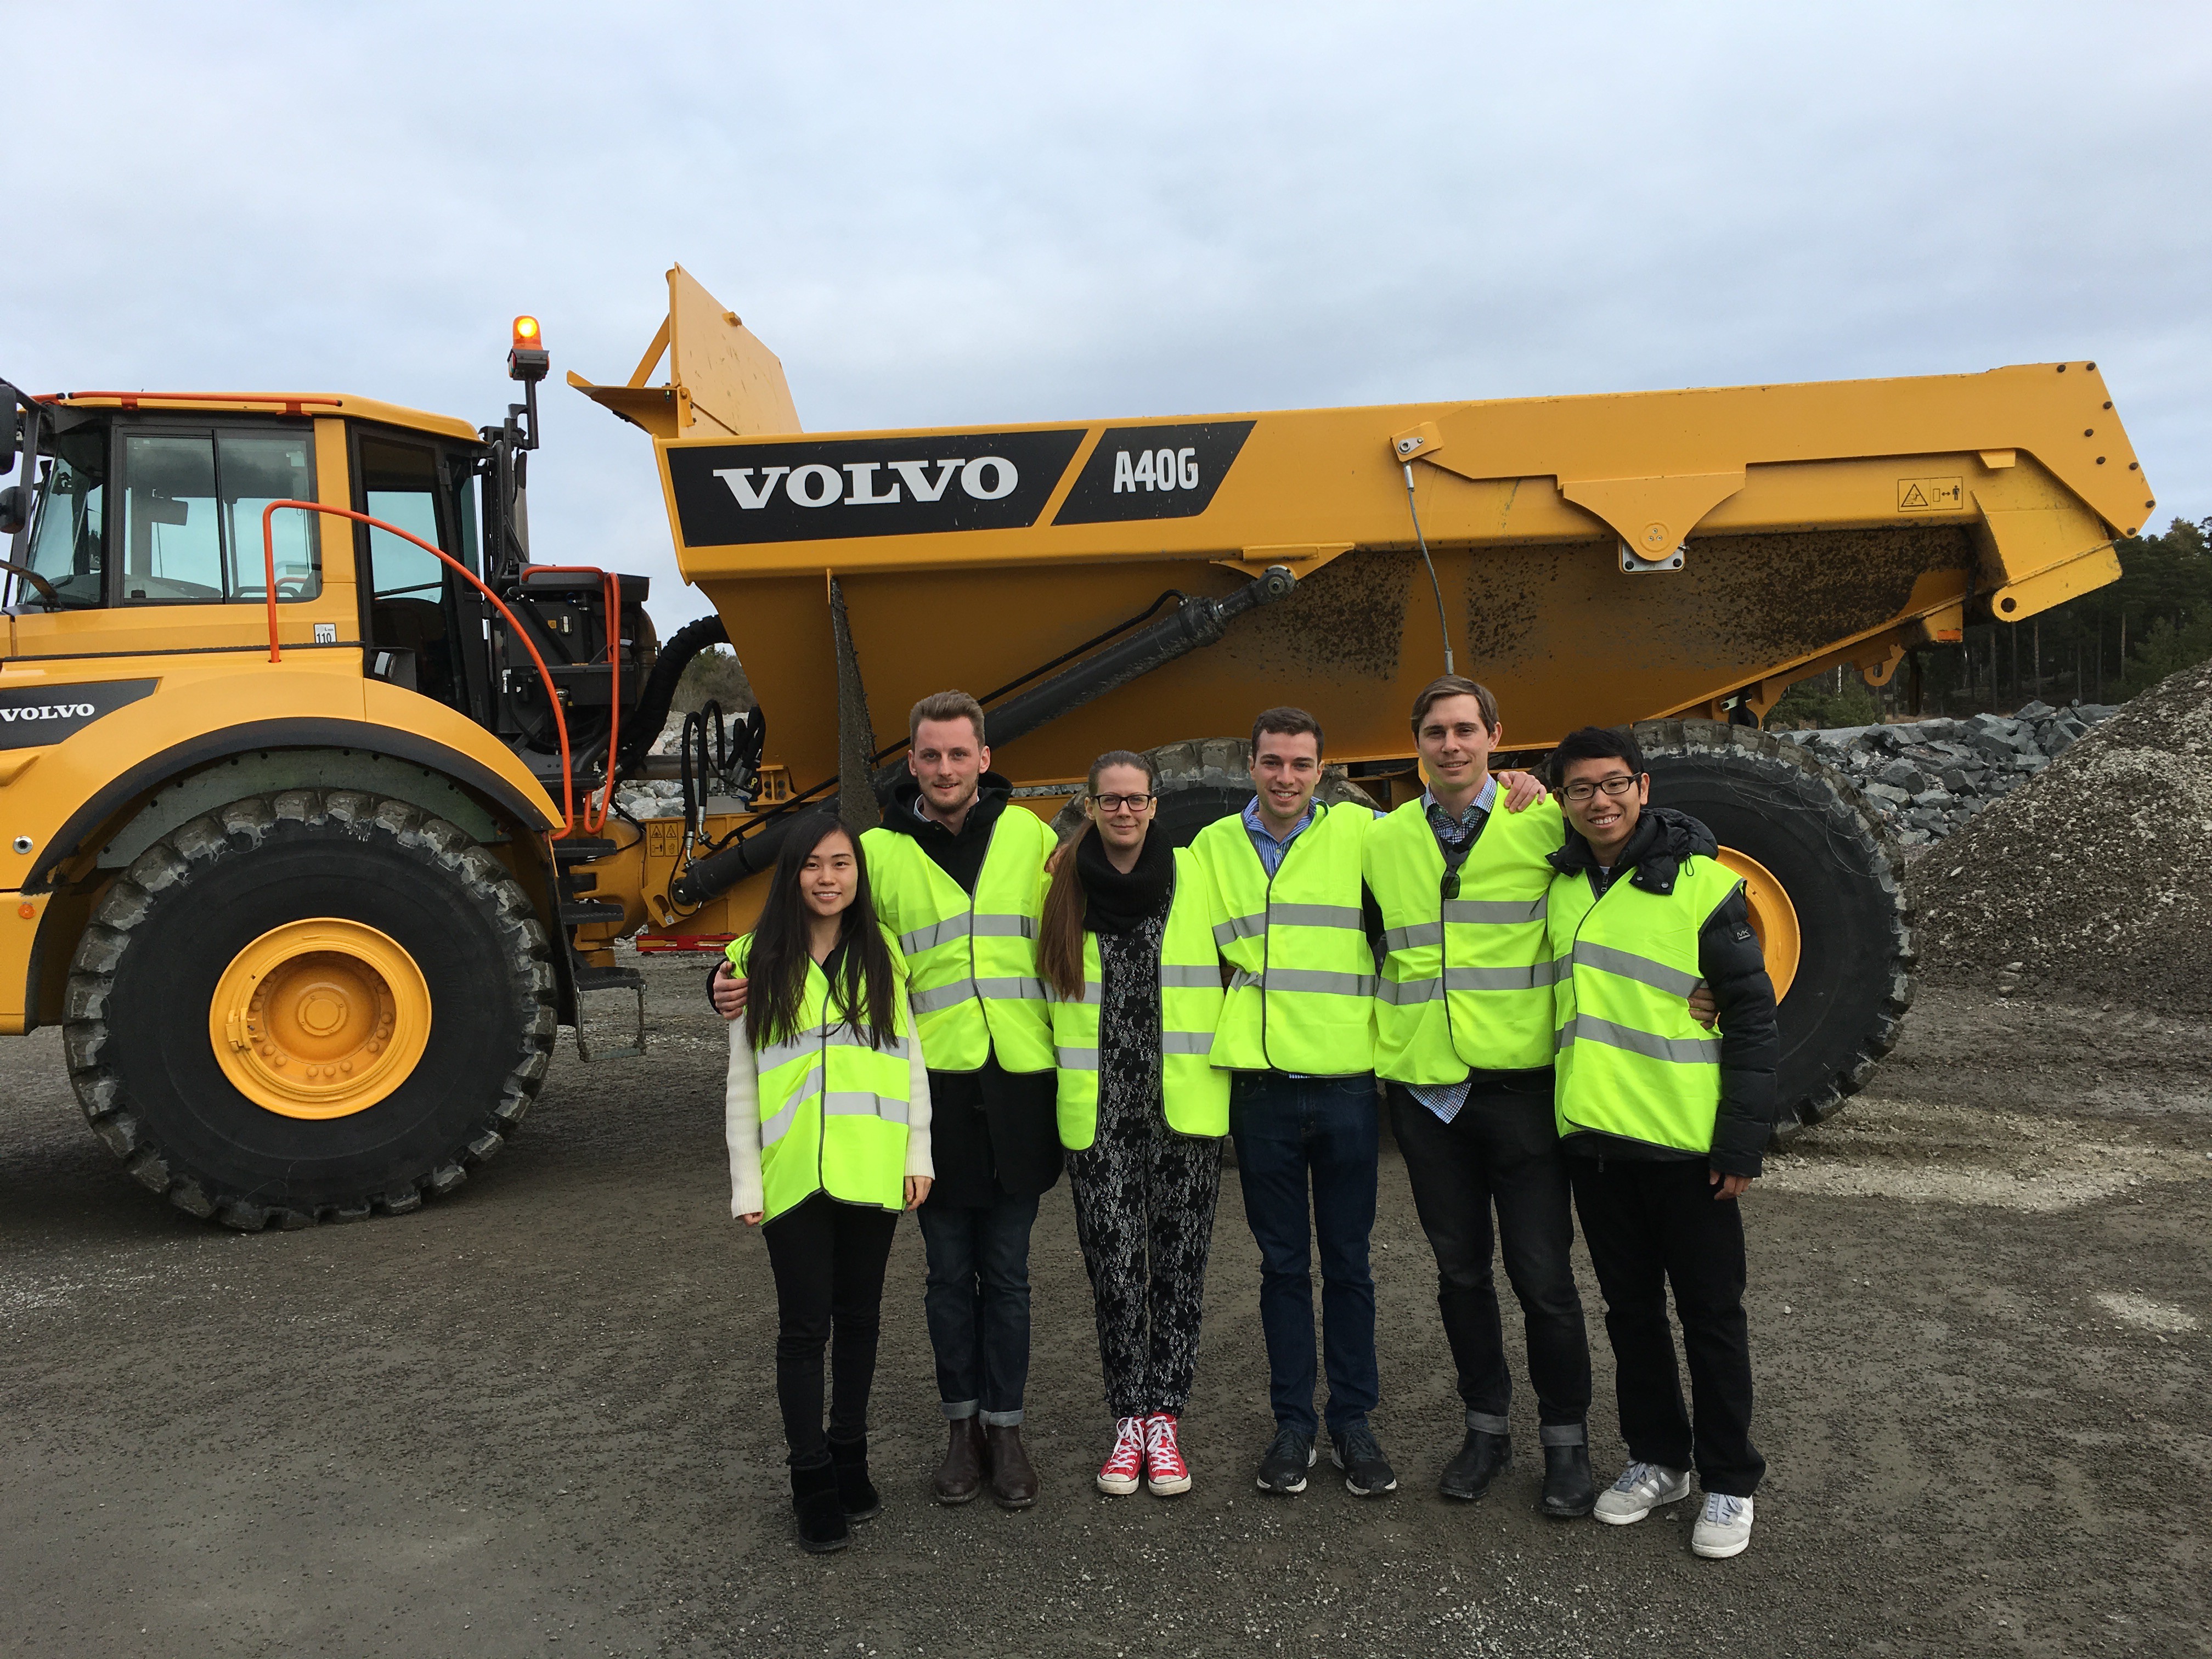 ME310 students at the Volvo CE test site in Eskilstuna.